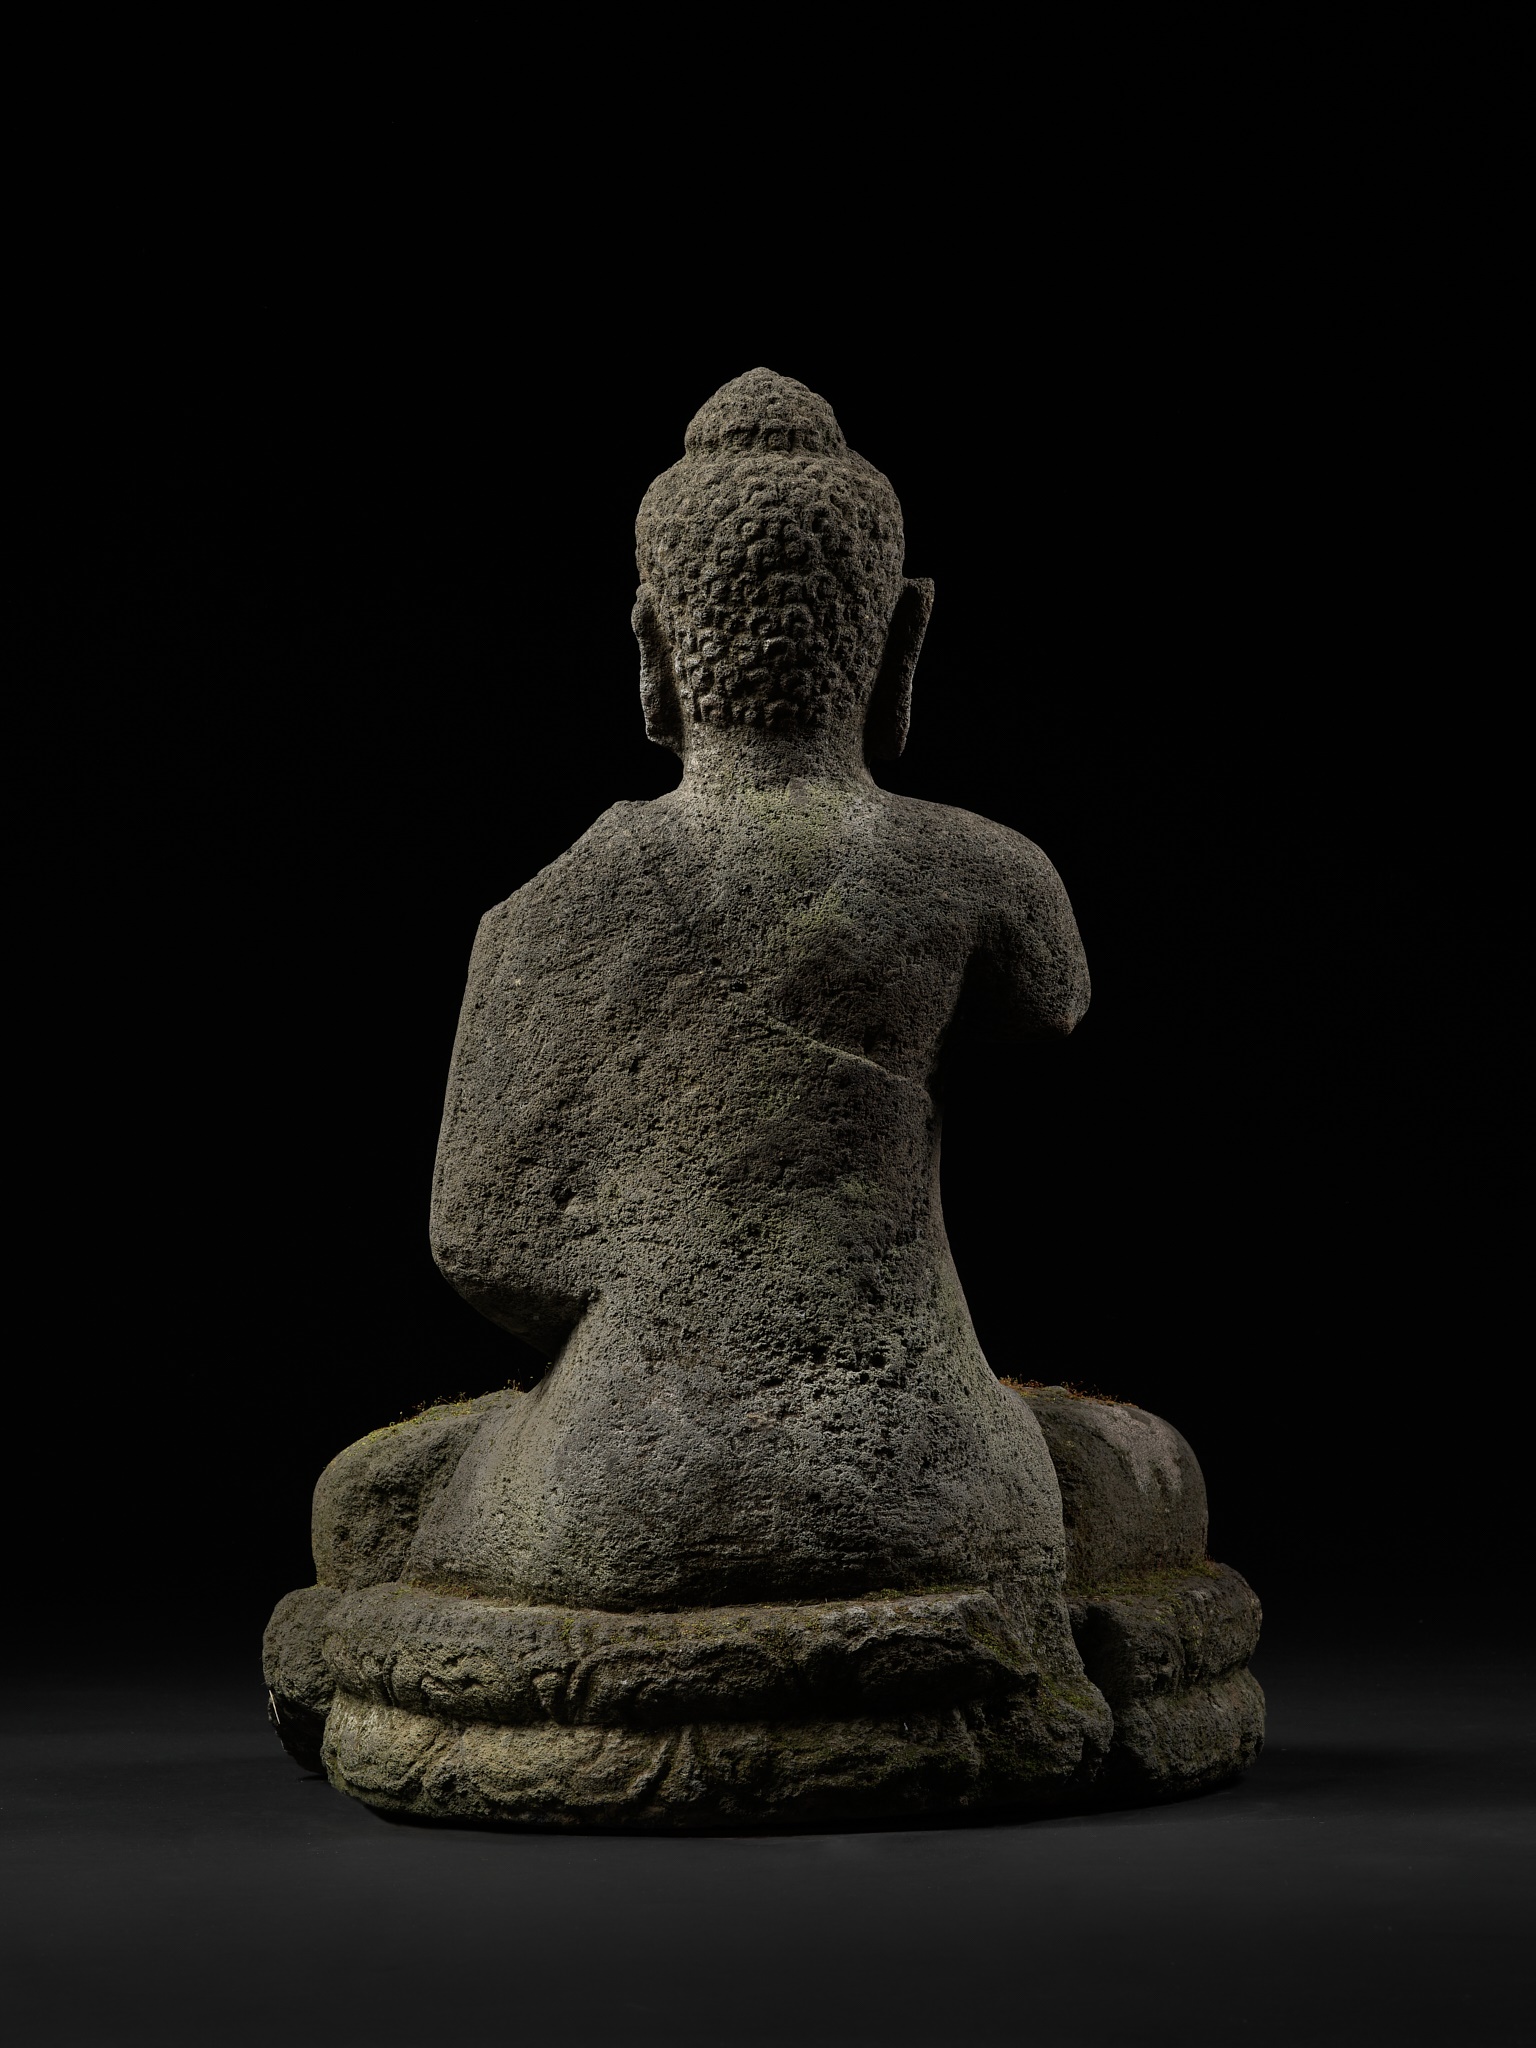 A VOLCANIC STONE FIGURE OF BUDDHA, CENTRAL JAVA, INDONESIA, FIRST HALF OF THE 9TH CENTURY - Image 12 of 14